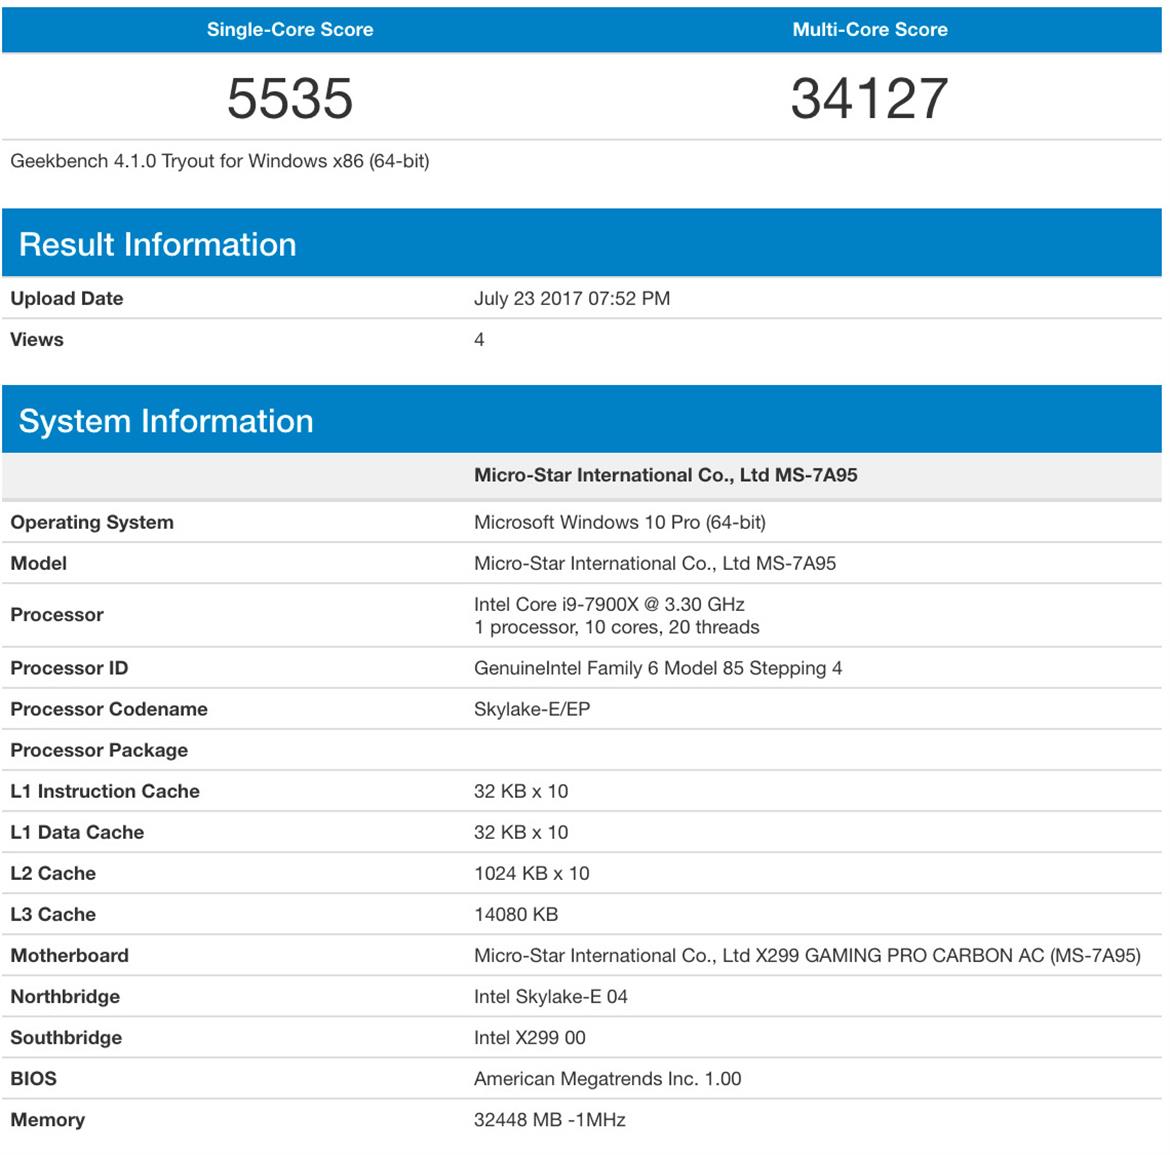 Intel’s 2.5GHz Core i9-7960X 16-Core, 32-Thread HEDT Processor Makes Geekbench Debut